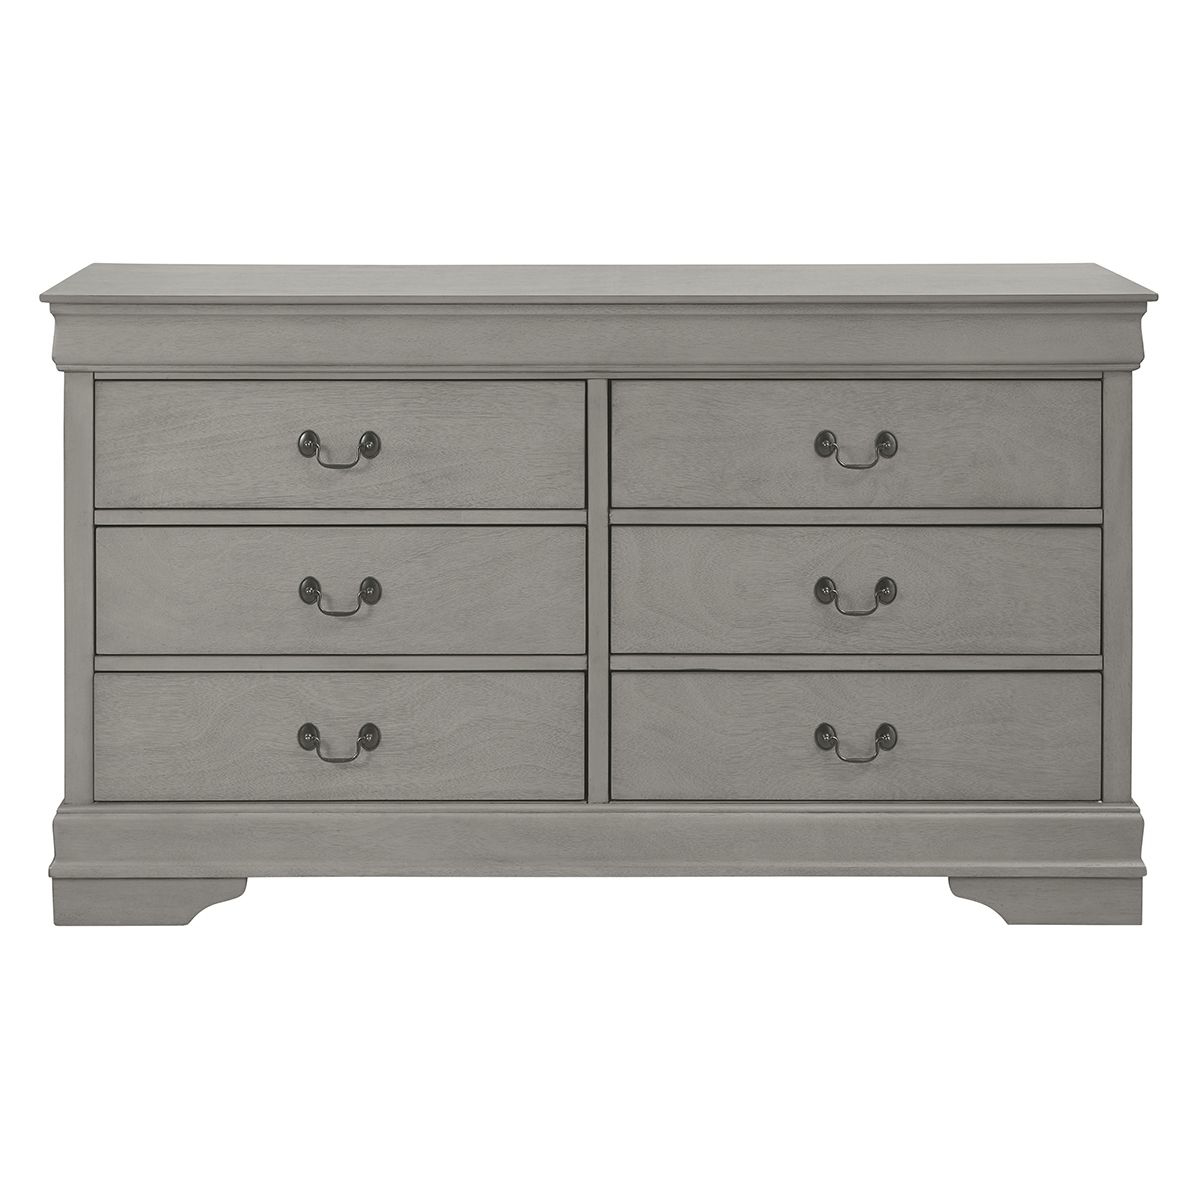 Picture of LOUIS GREY DRESSER